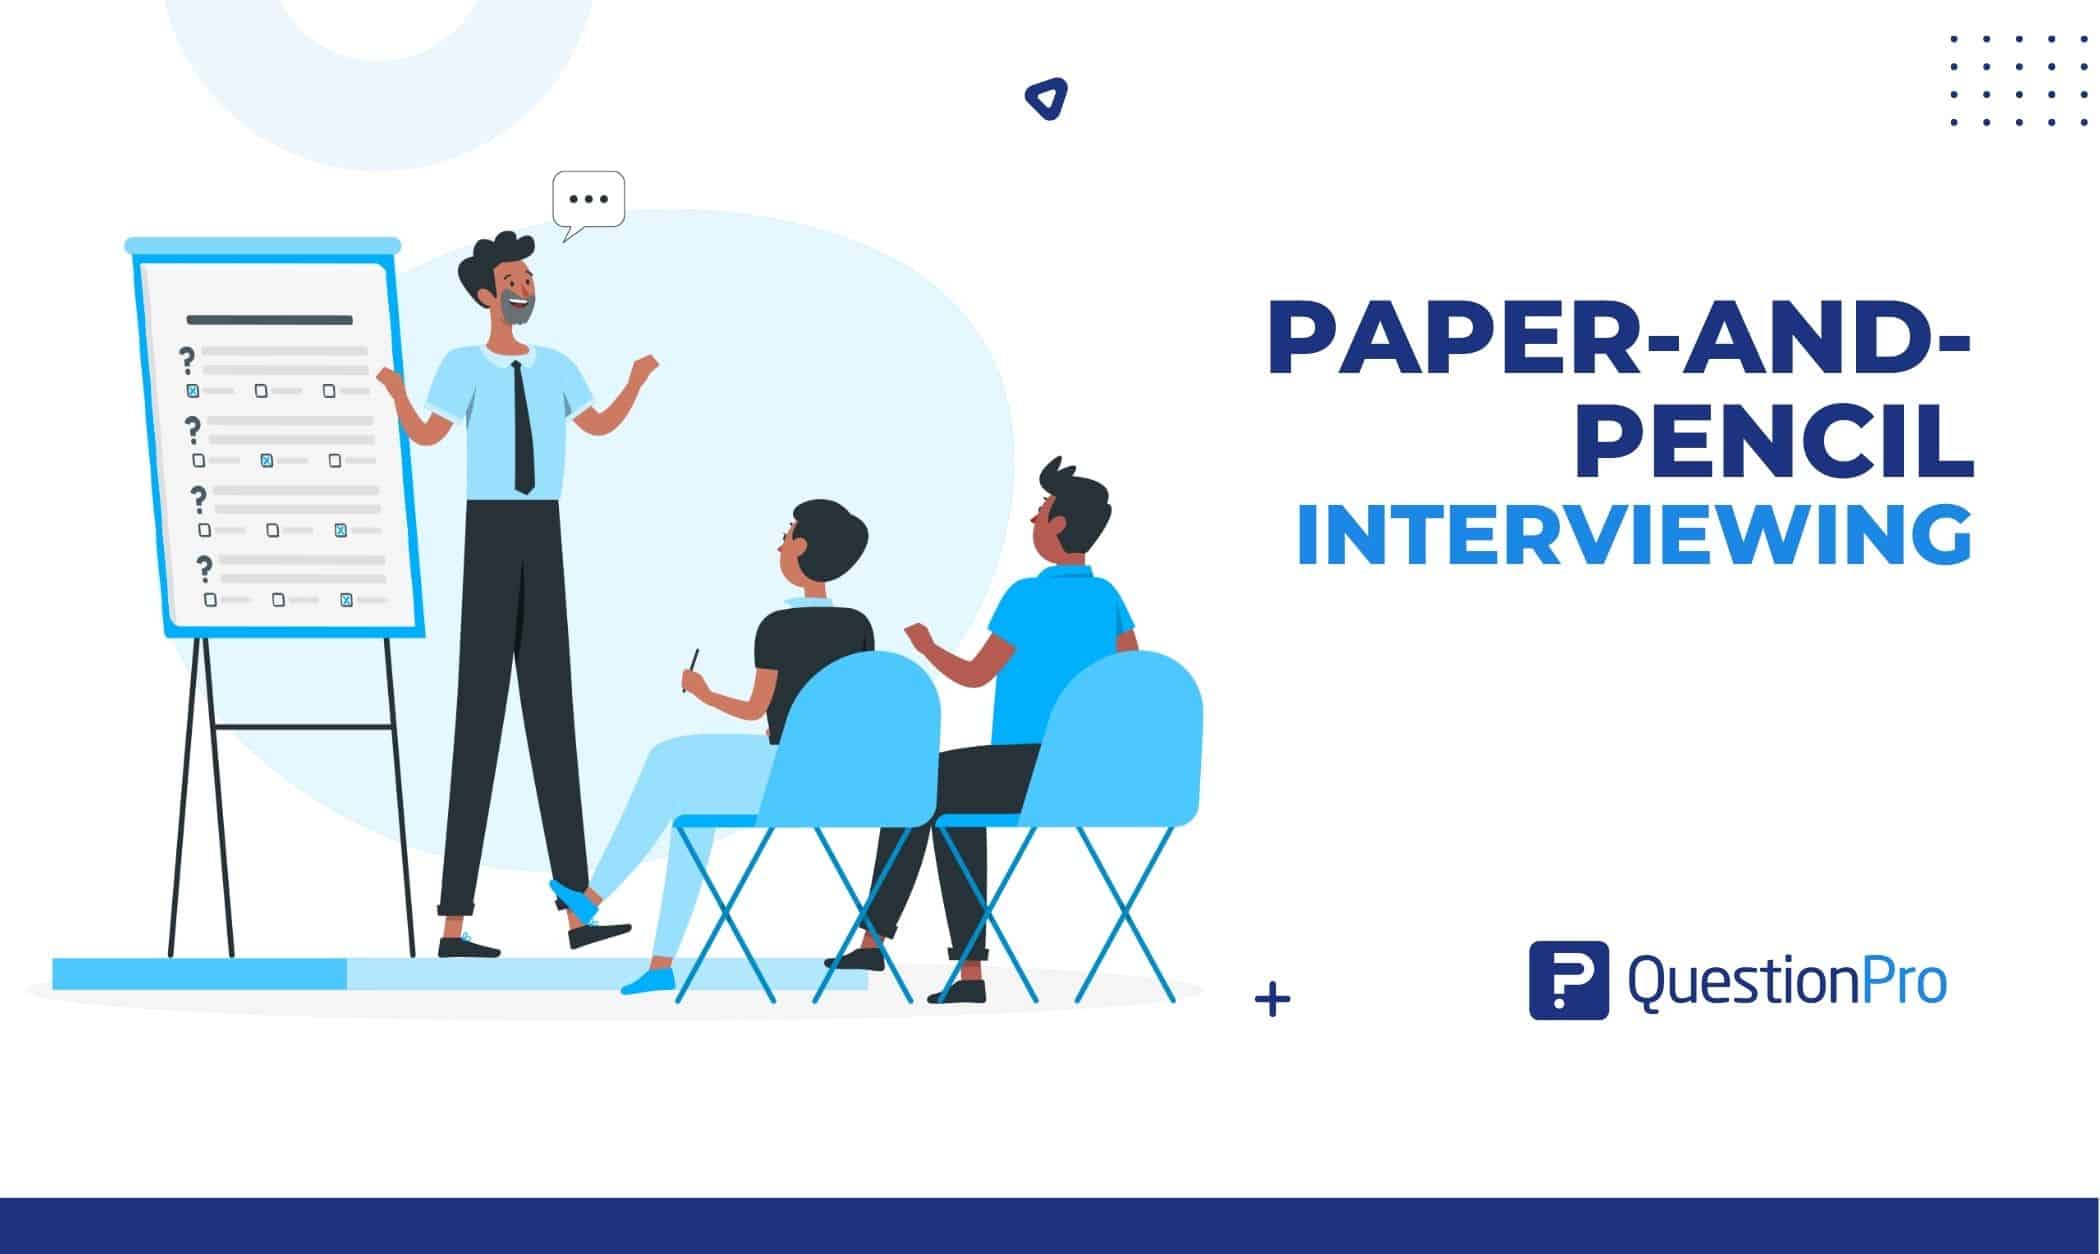 Paper-and-Pencil interviewing is the most common way to collect data. It has several advantages and disadvantages. Read on for more.